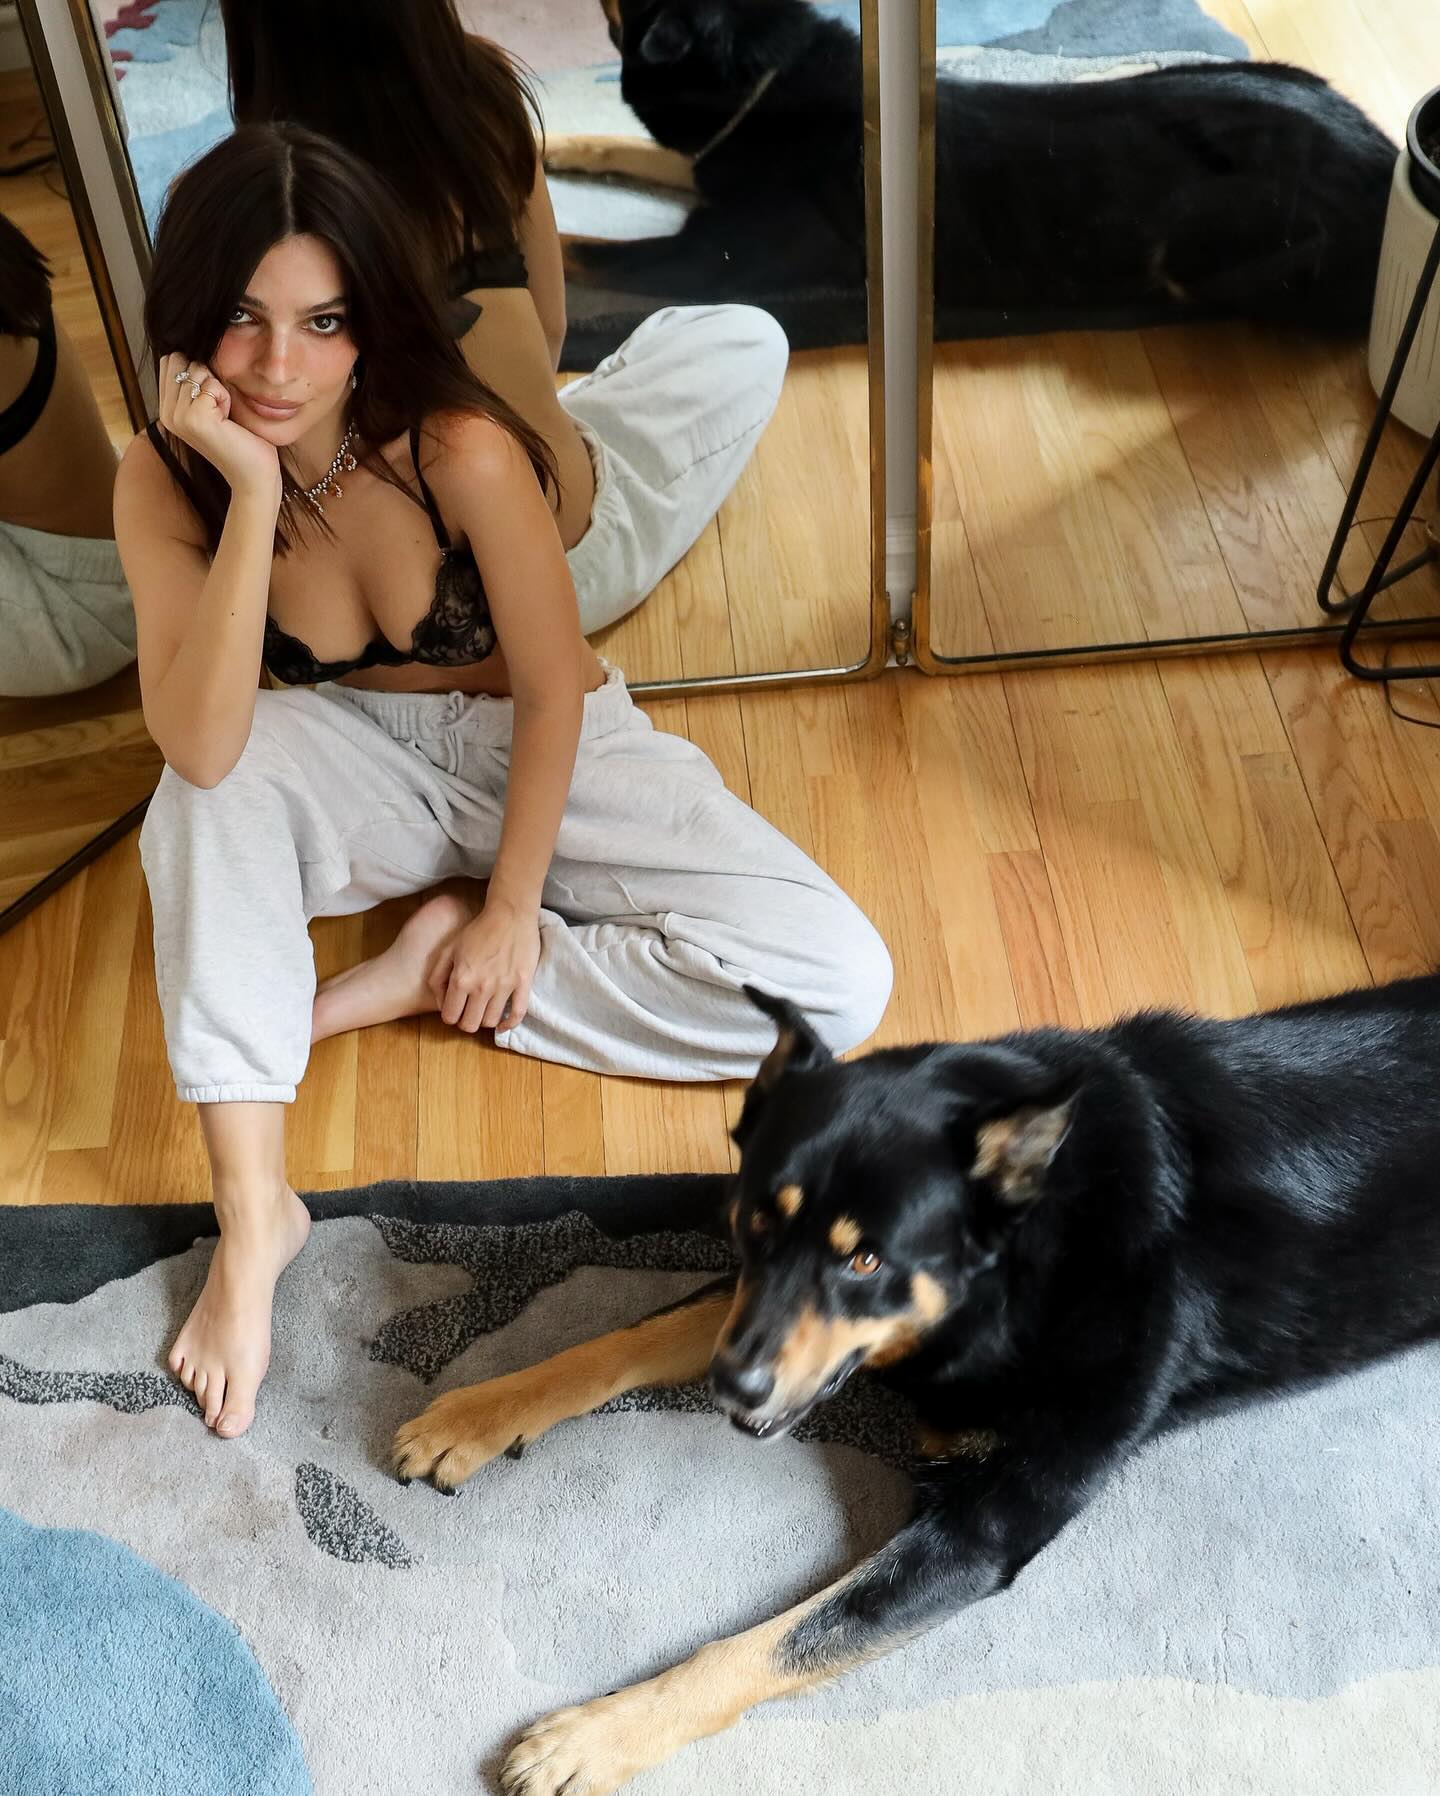 Emily Ratajkowski shared pictures from home wearing black bra and chilling with her dog